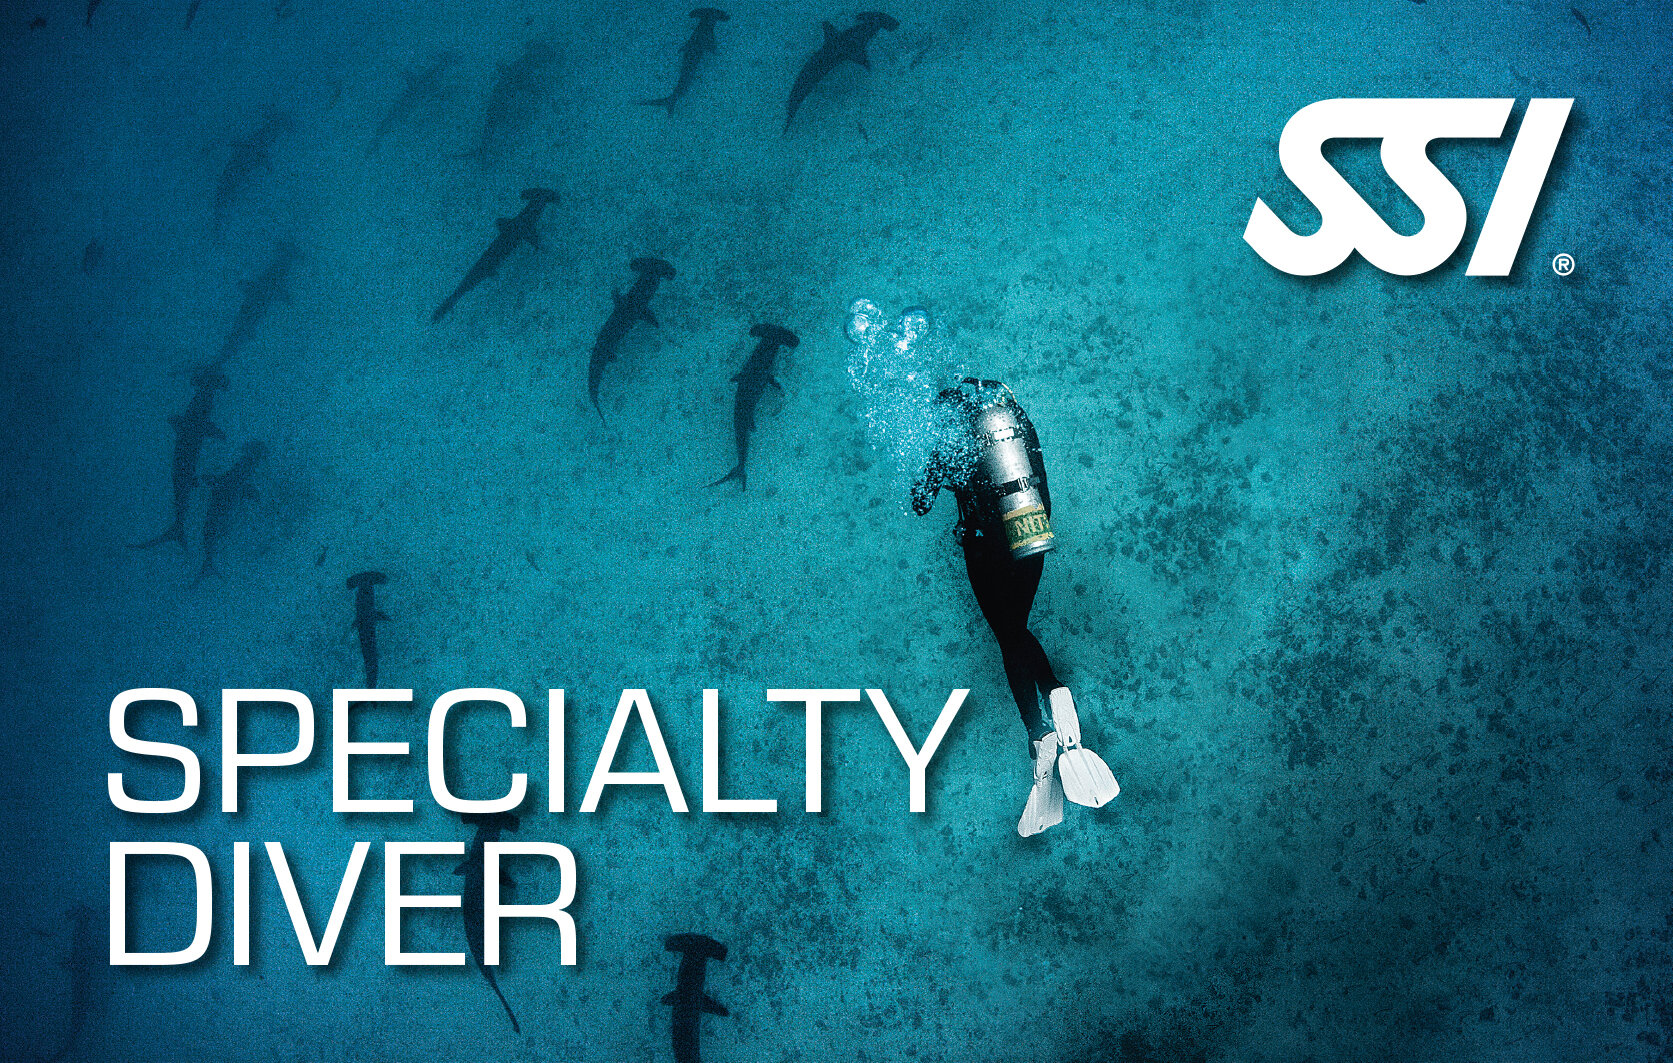 Speciality Diver SSI